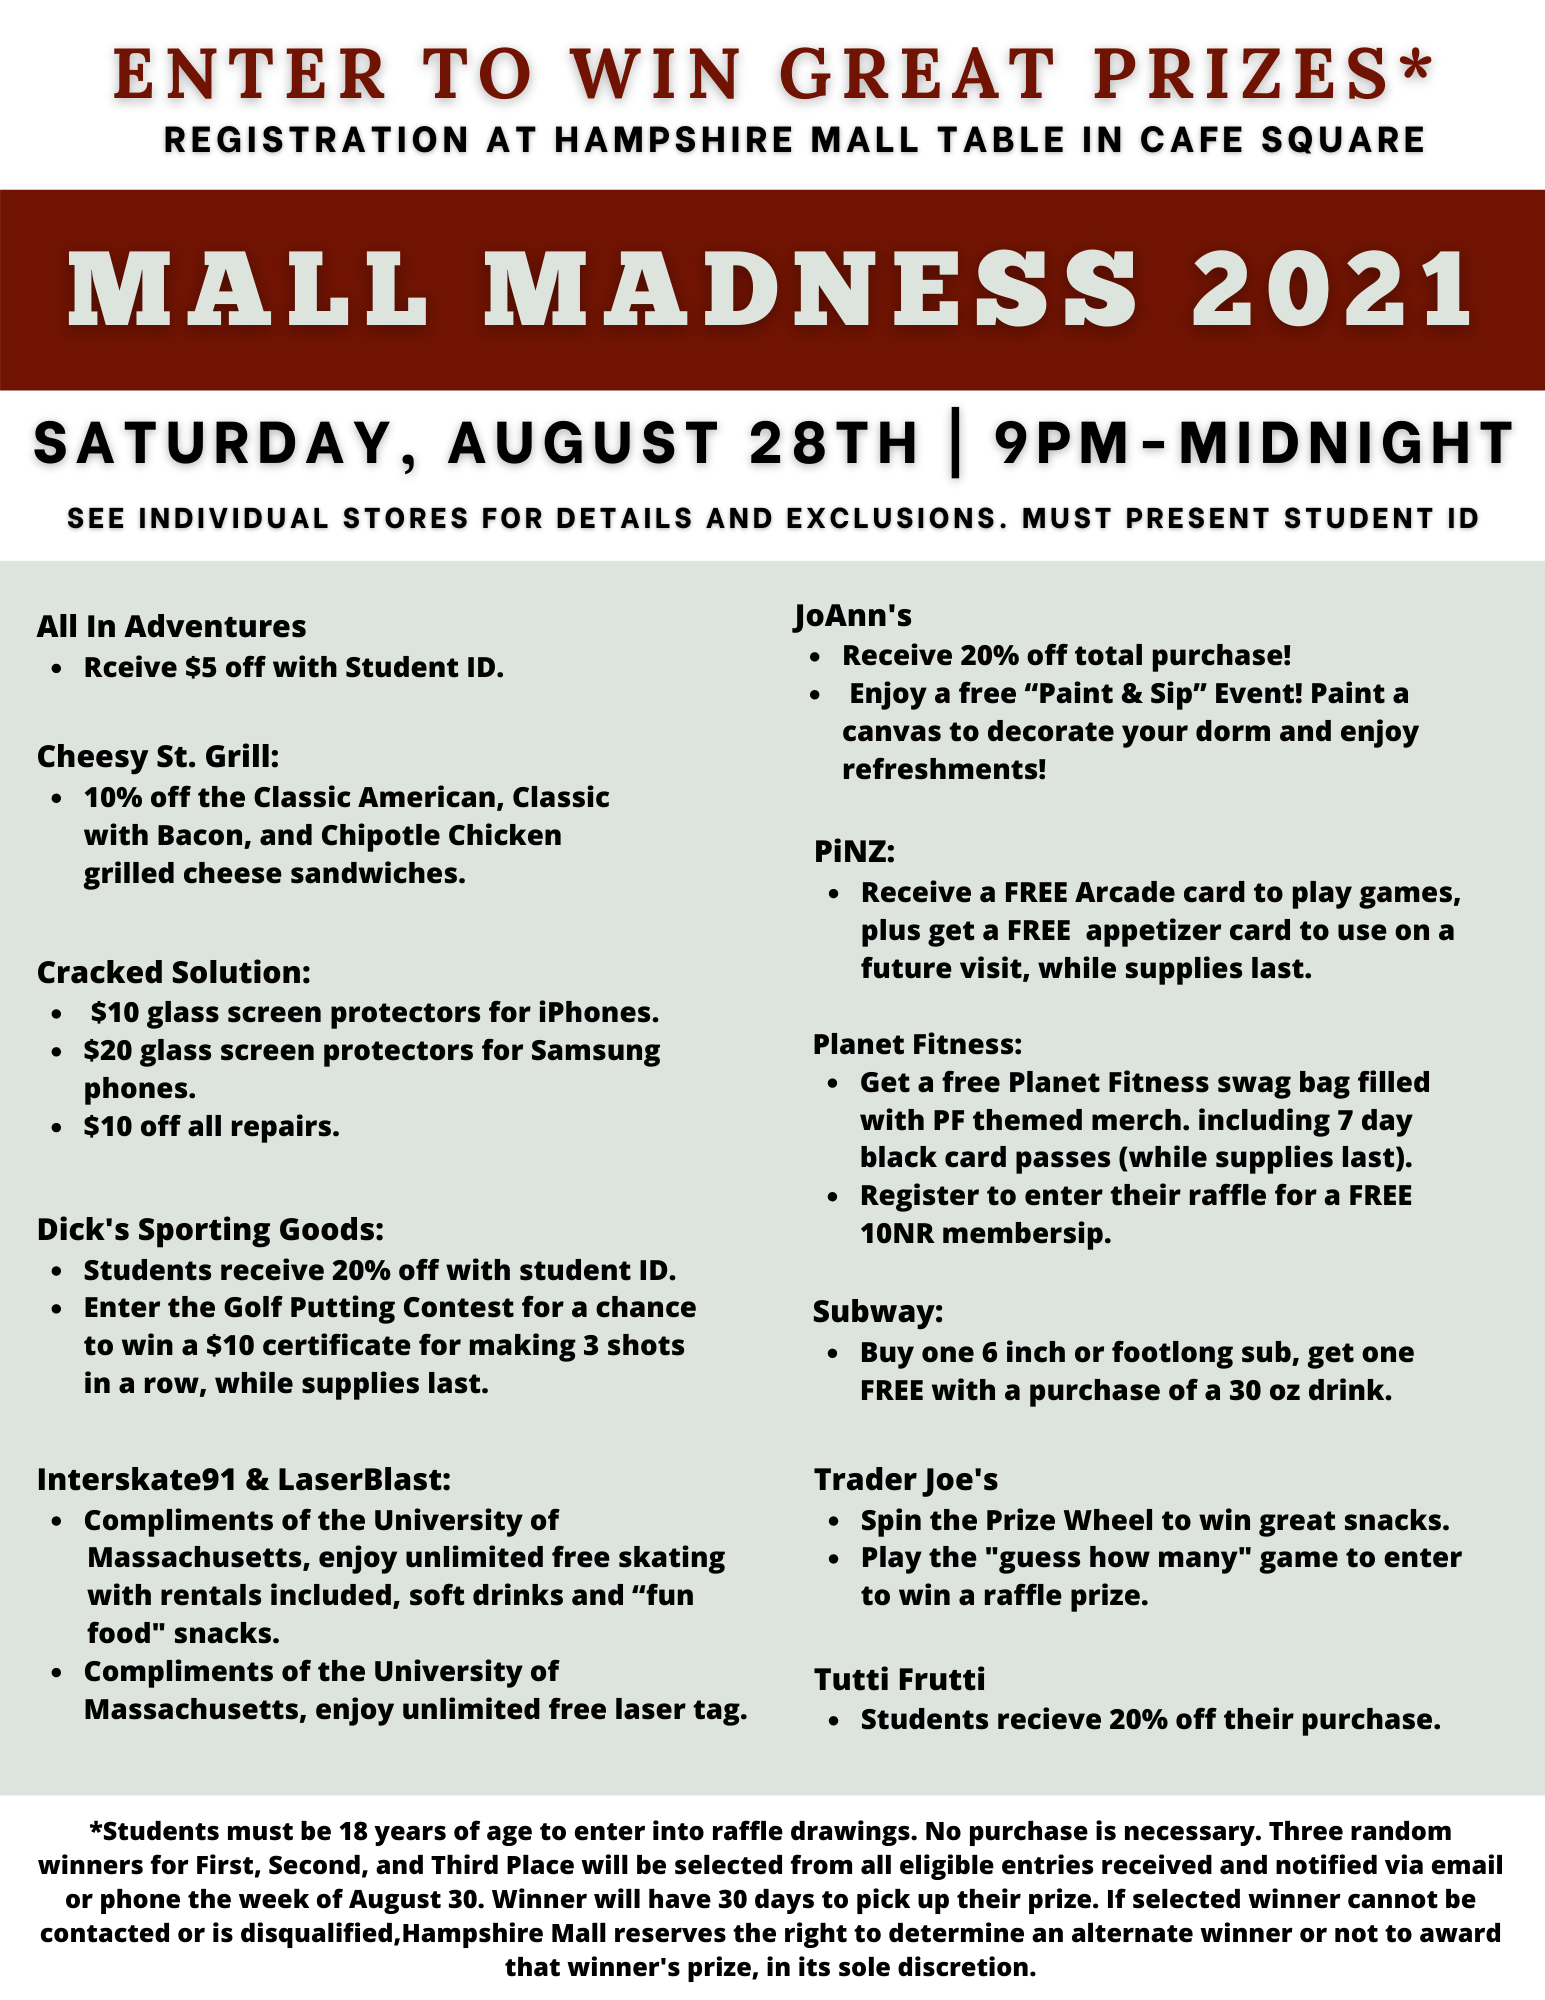 Mall Madness Offer List Updated